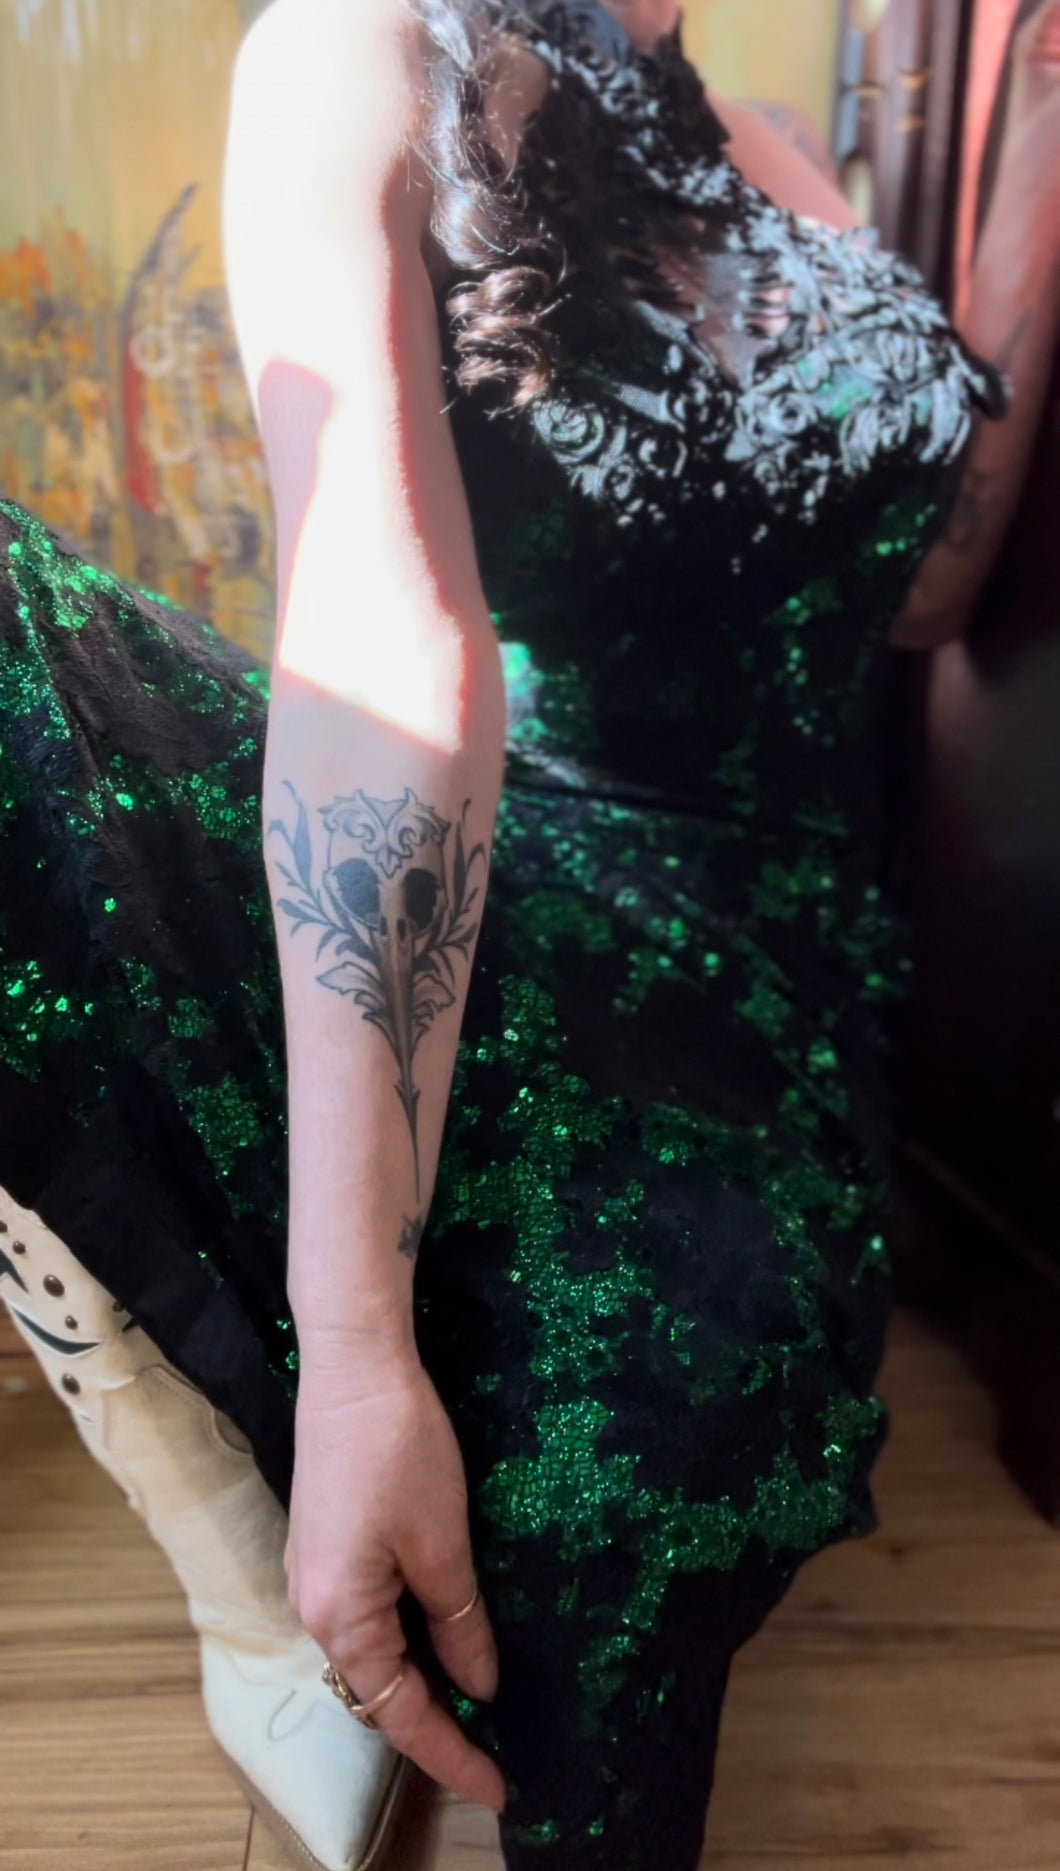 Stunner 1970’s 1980’s Vintage Emerald Green Sequin and Black Soutache Lace Wiggle Dress by Lorralie